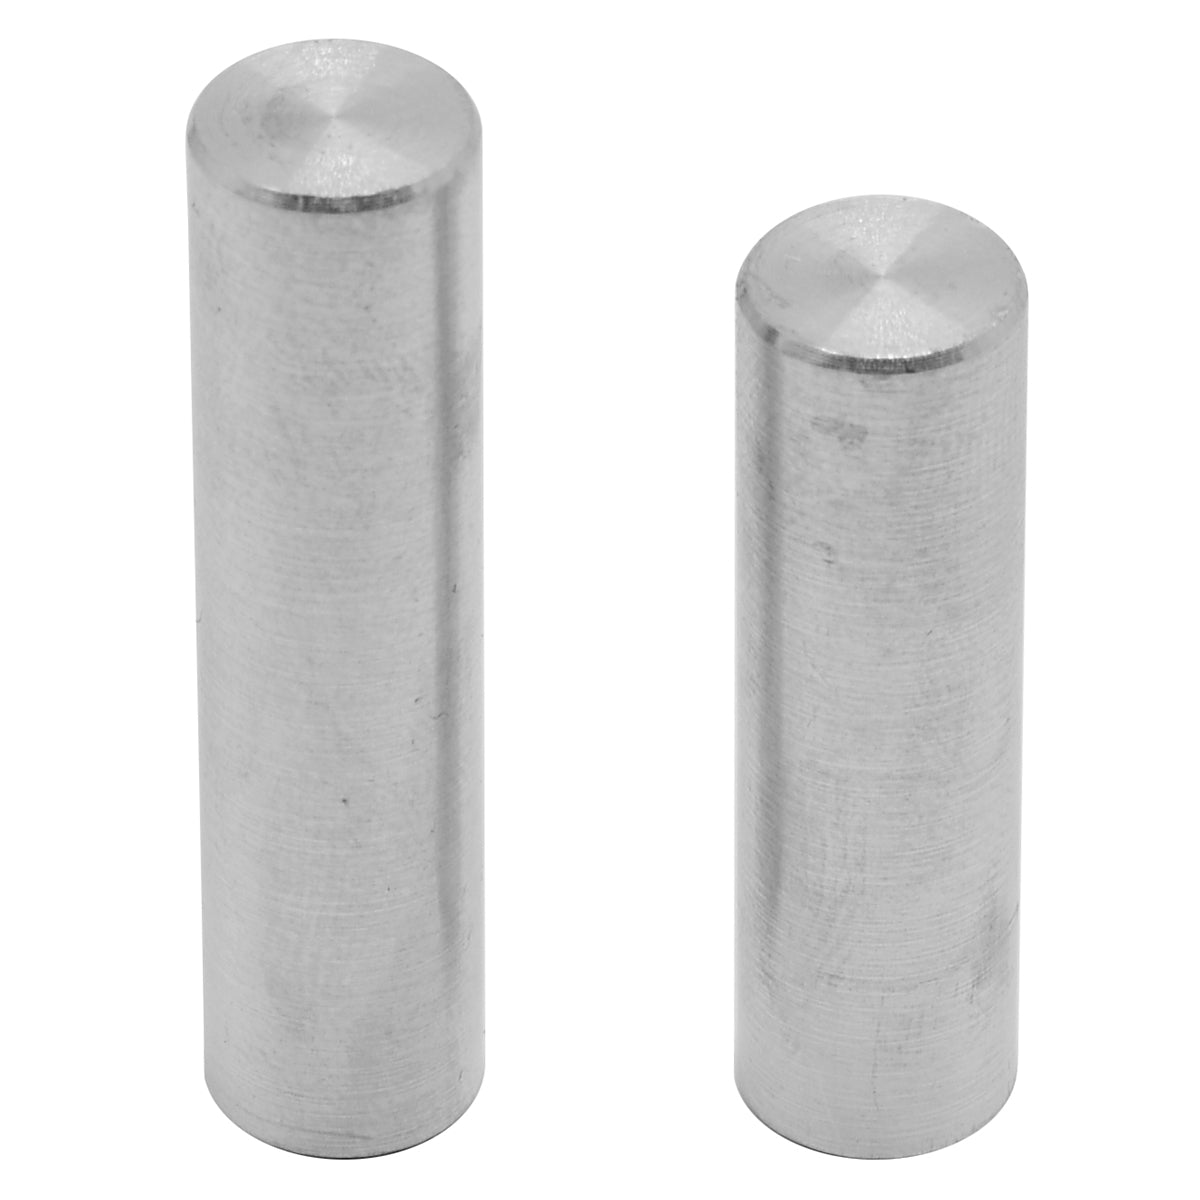 Long and Short Lever Wedge Bars used to open locked tops